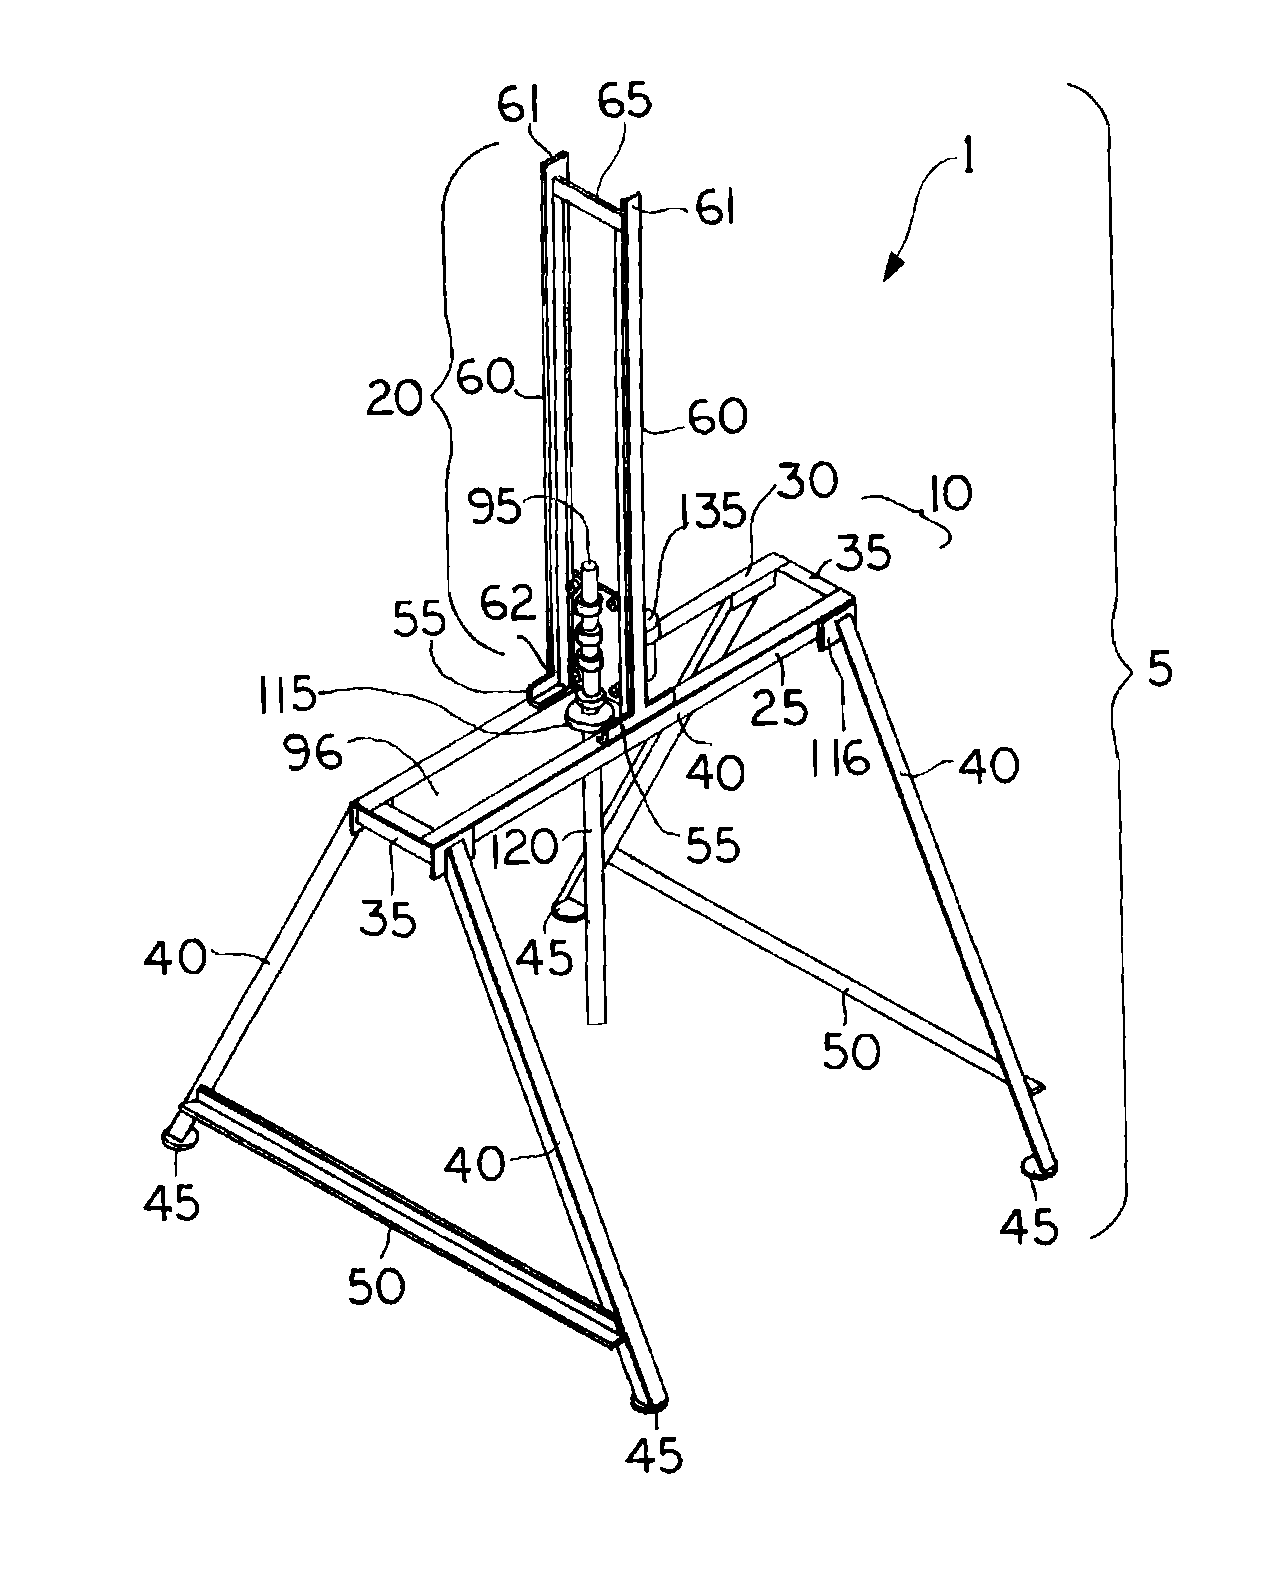 Container emptying apparatus and method